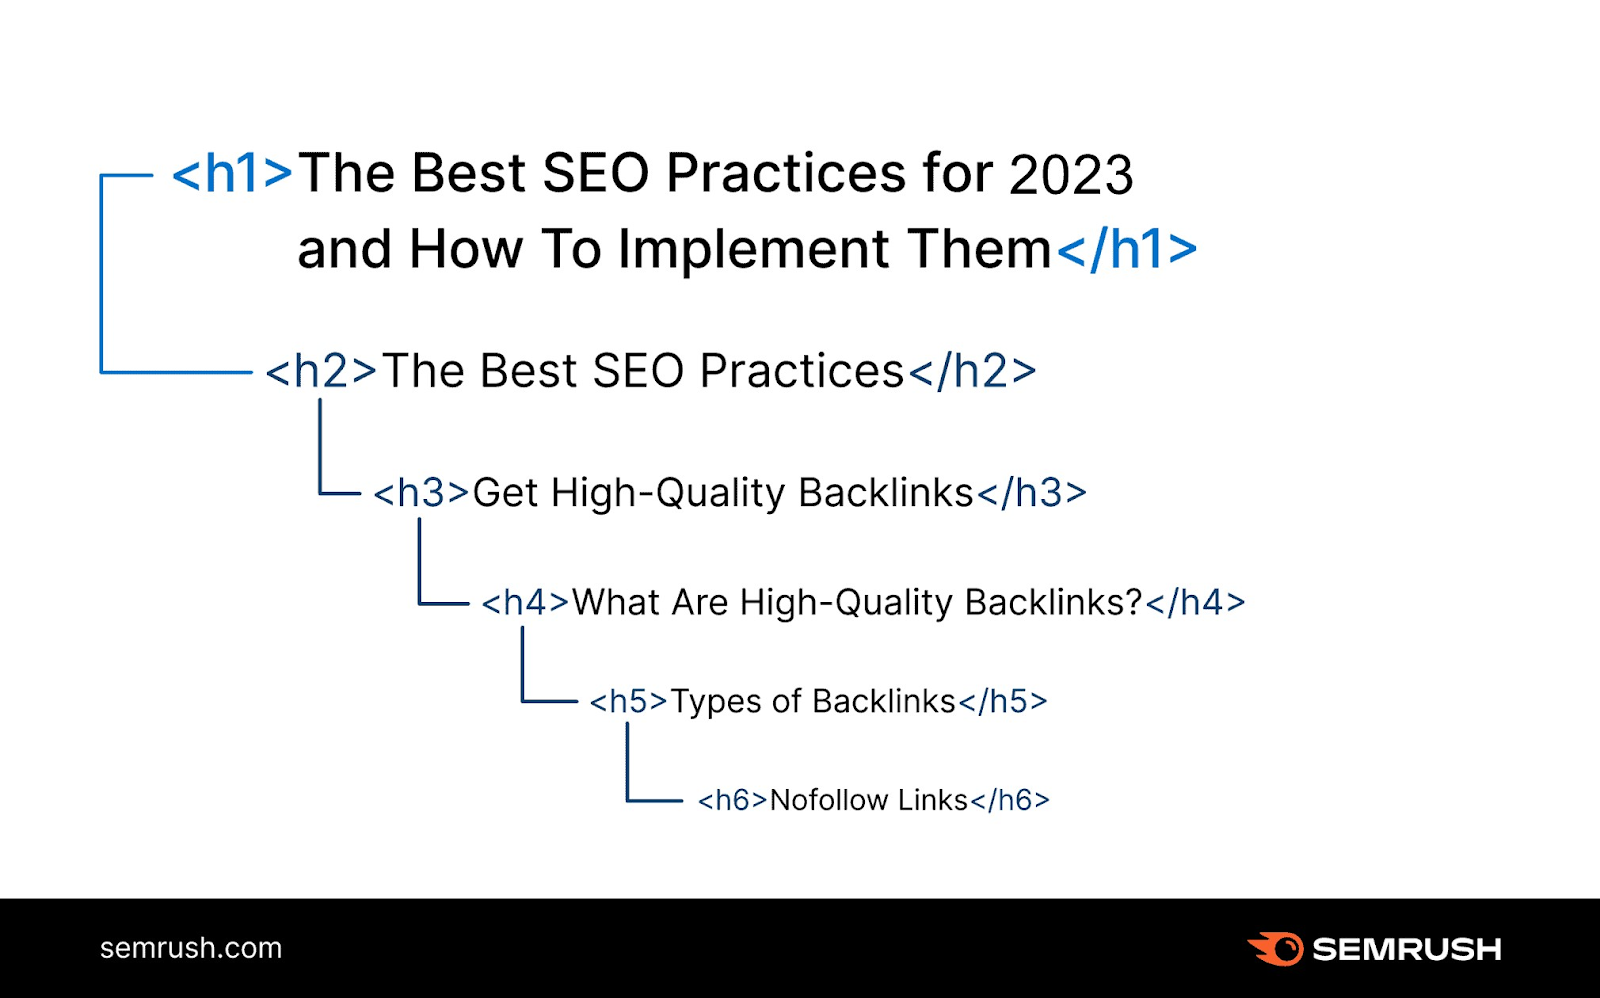 An infographic by Semrush showing the best h1 SEO practices for 2023 and how to implement them